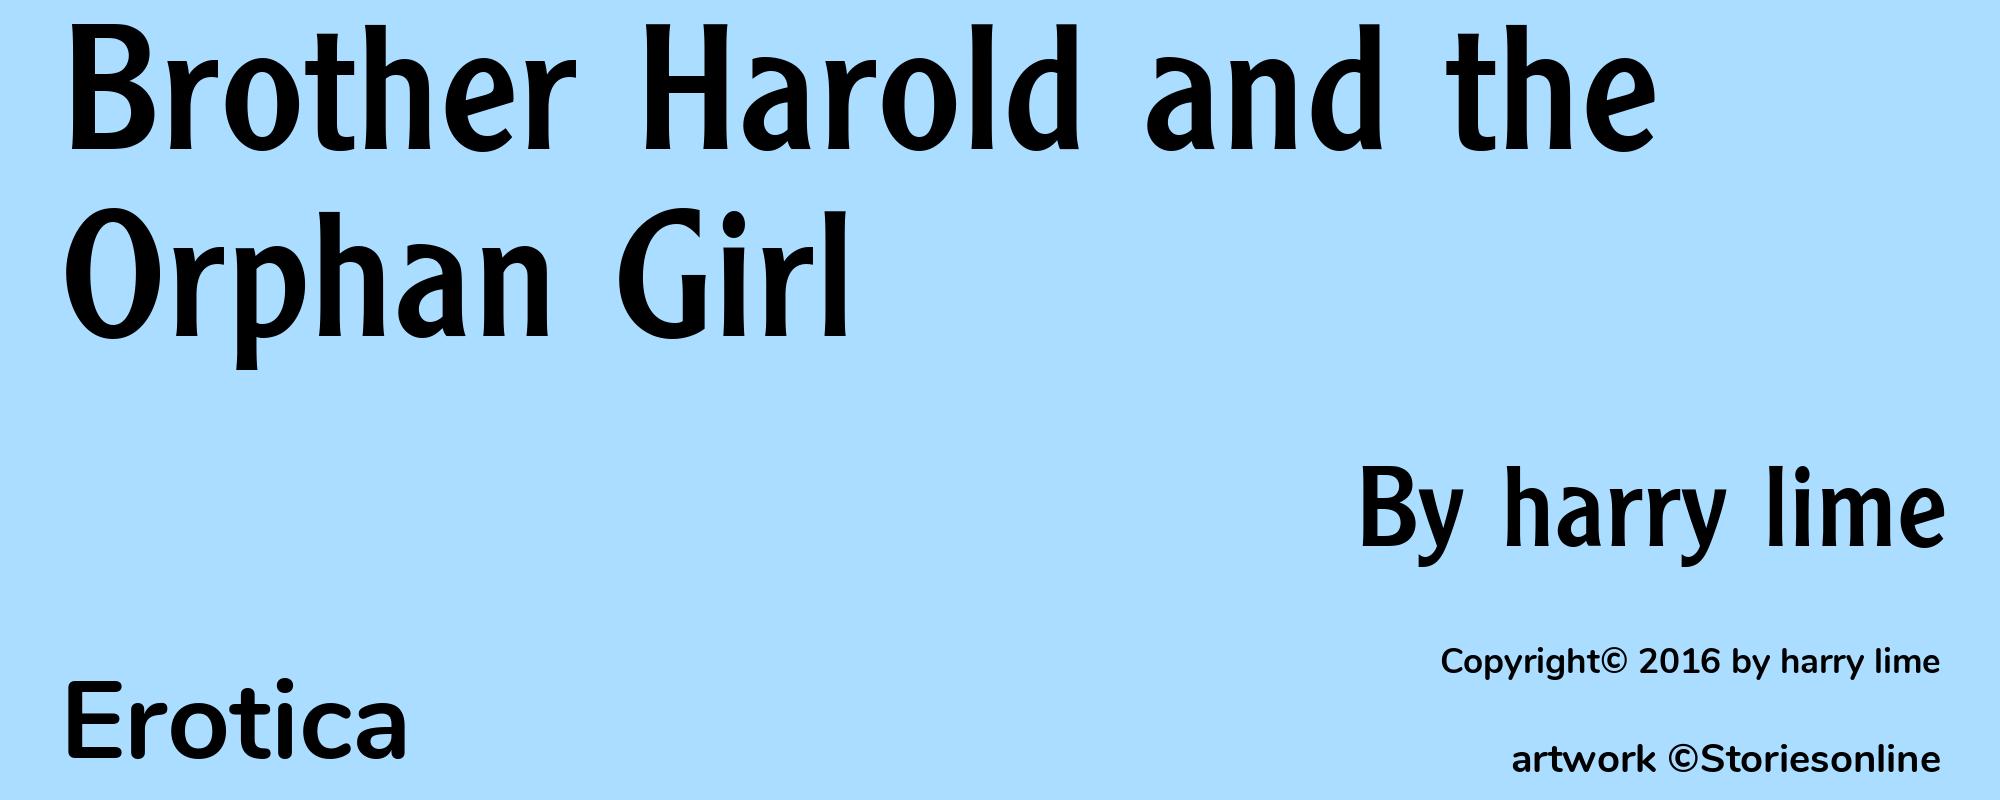 Brother Harold and the Orphan Girl - Cover